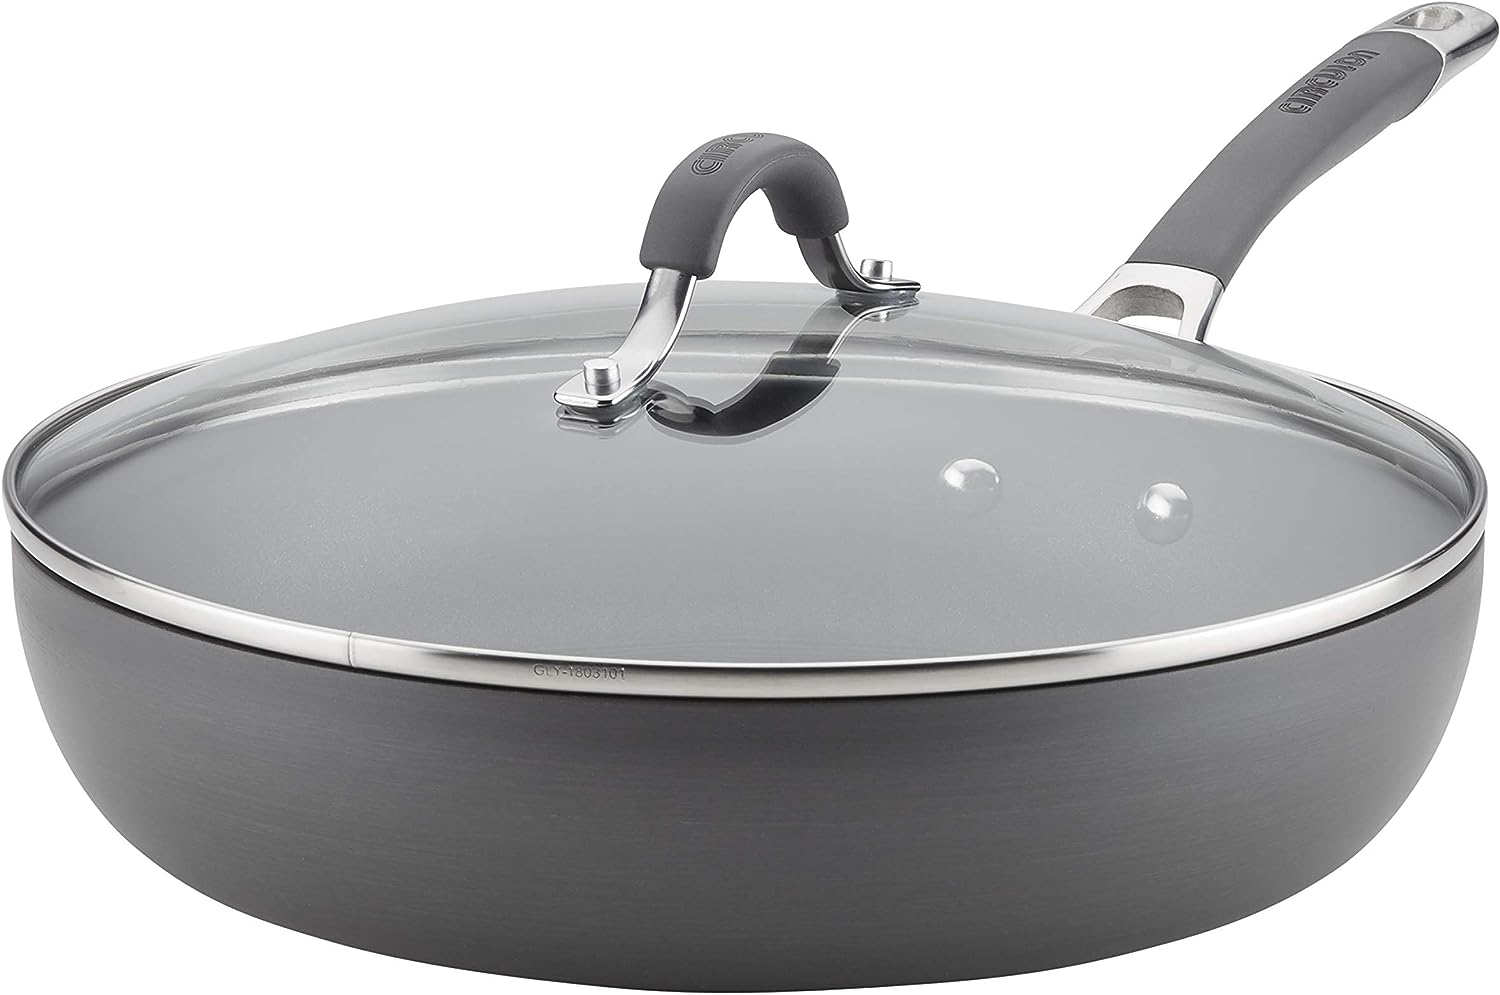 https://bigbigmart.com/wp-content/uploads/2023/08/Circulon-Radiance-Deep-Hard-Anodized-Nonstick-Frying-Pan-Skillet-with-Lid-12-Inch-Gray.jpg